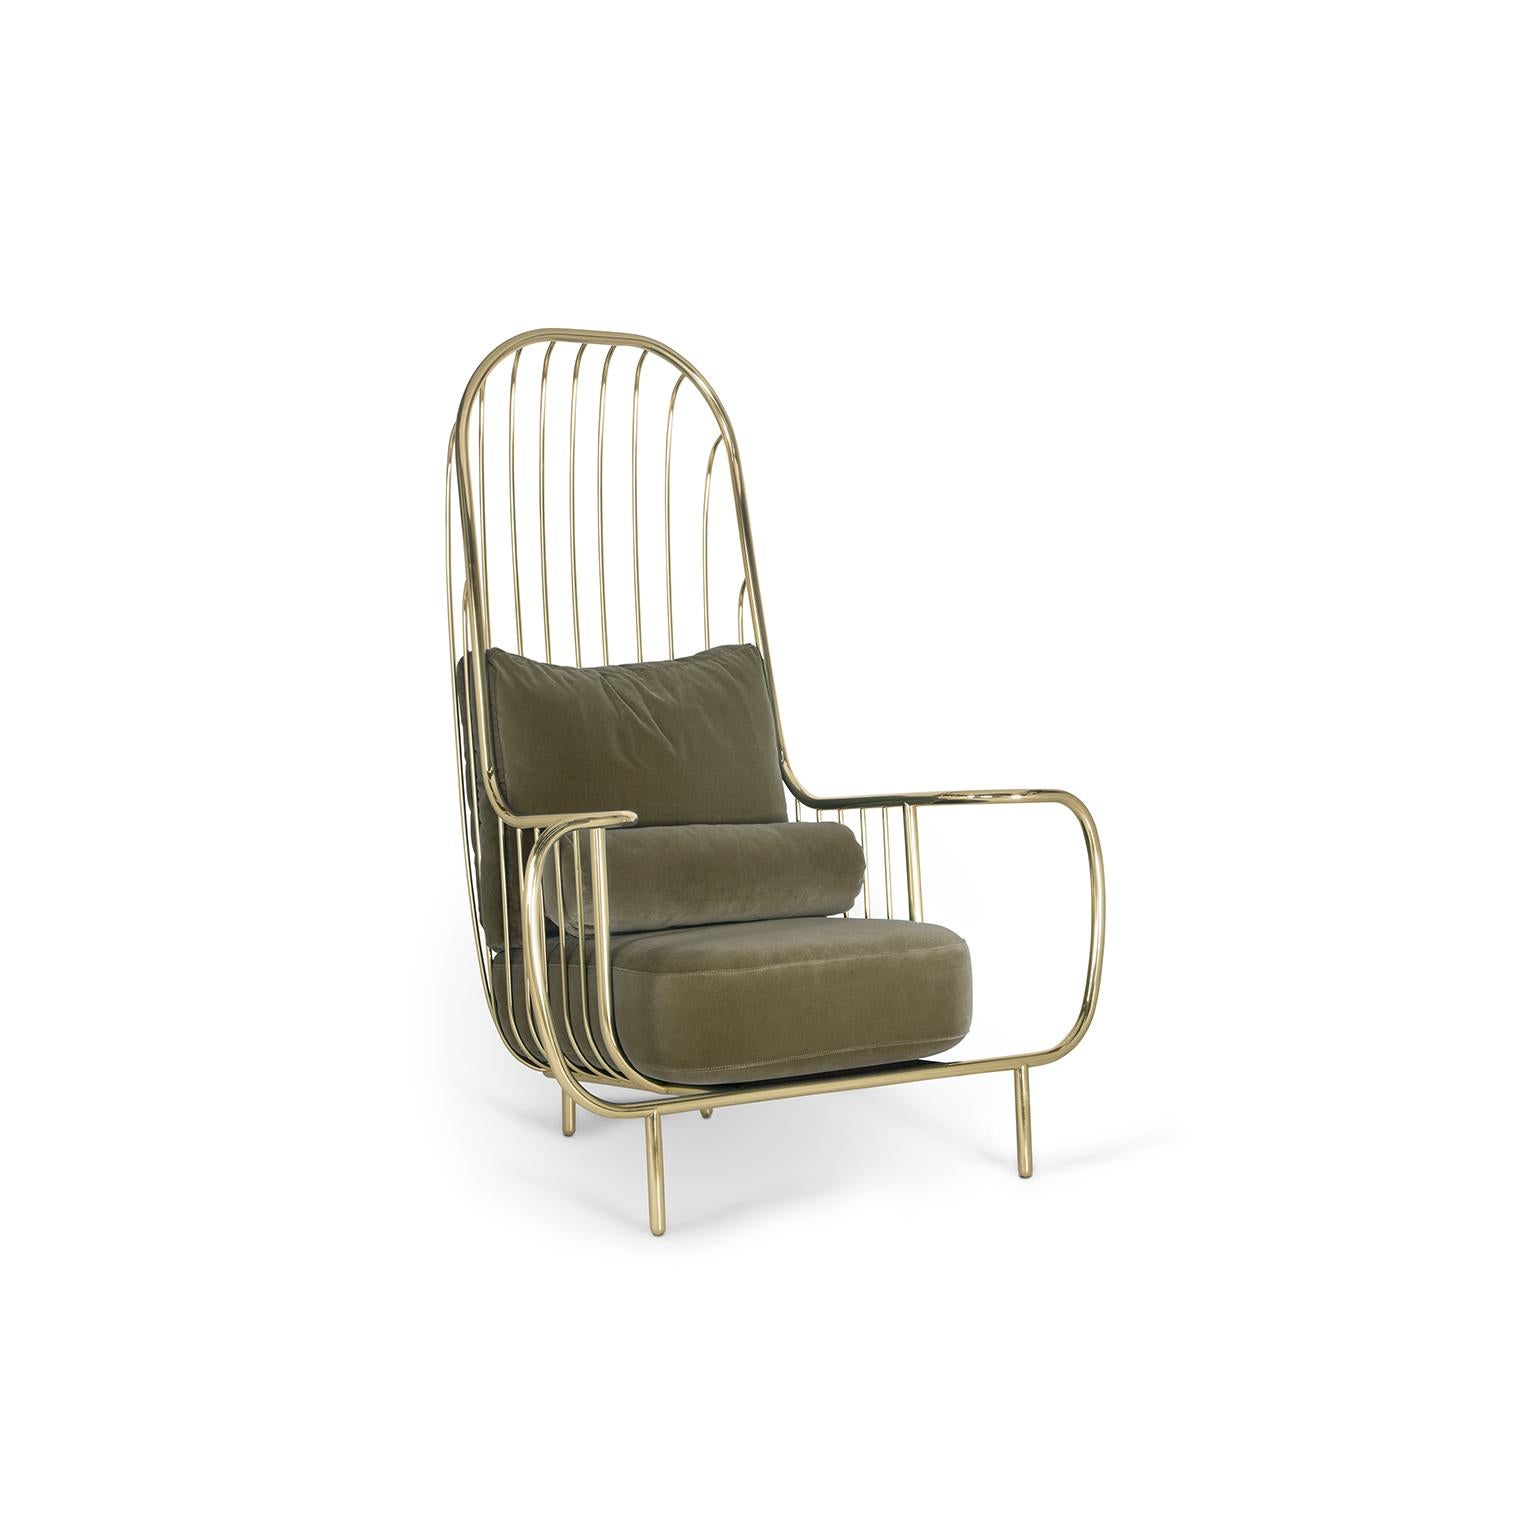 Portuguese Modern Liberty Armchair High Back in Polished Brass and Olive Colour Velvet For Sale